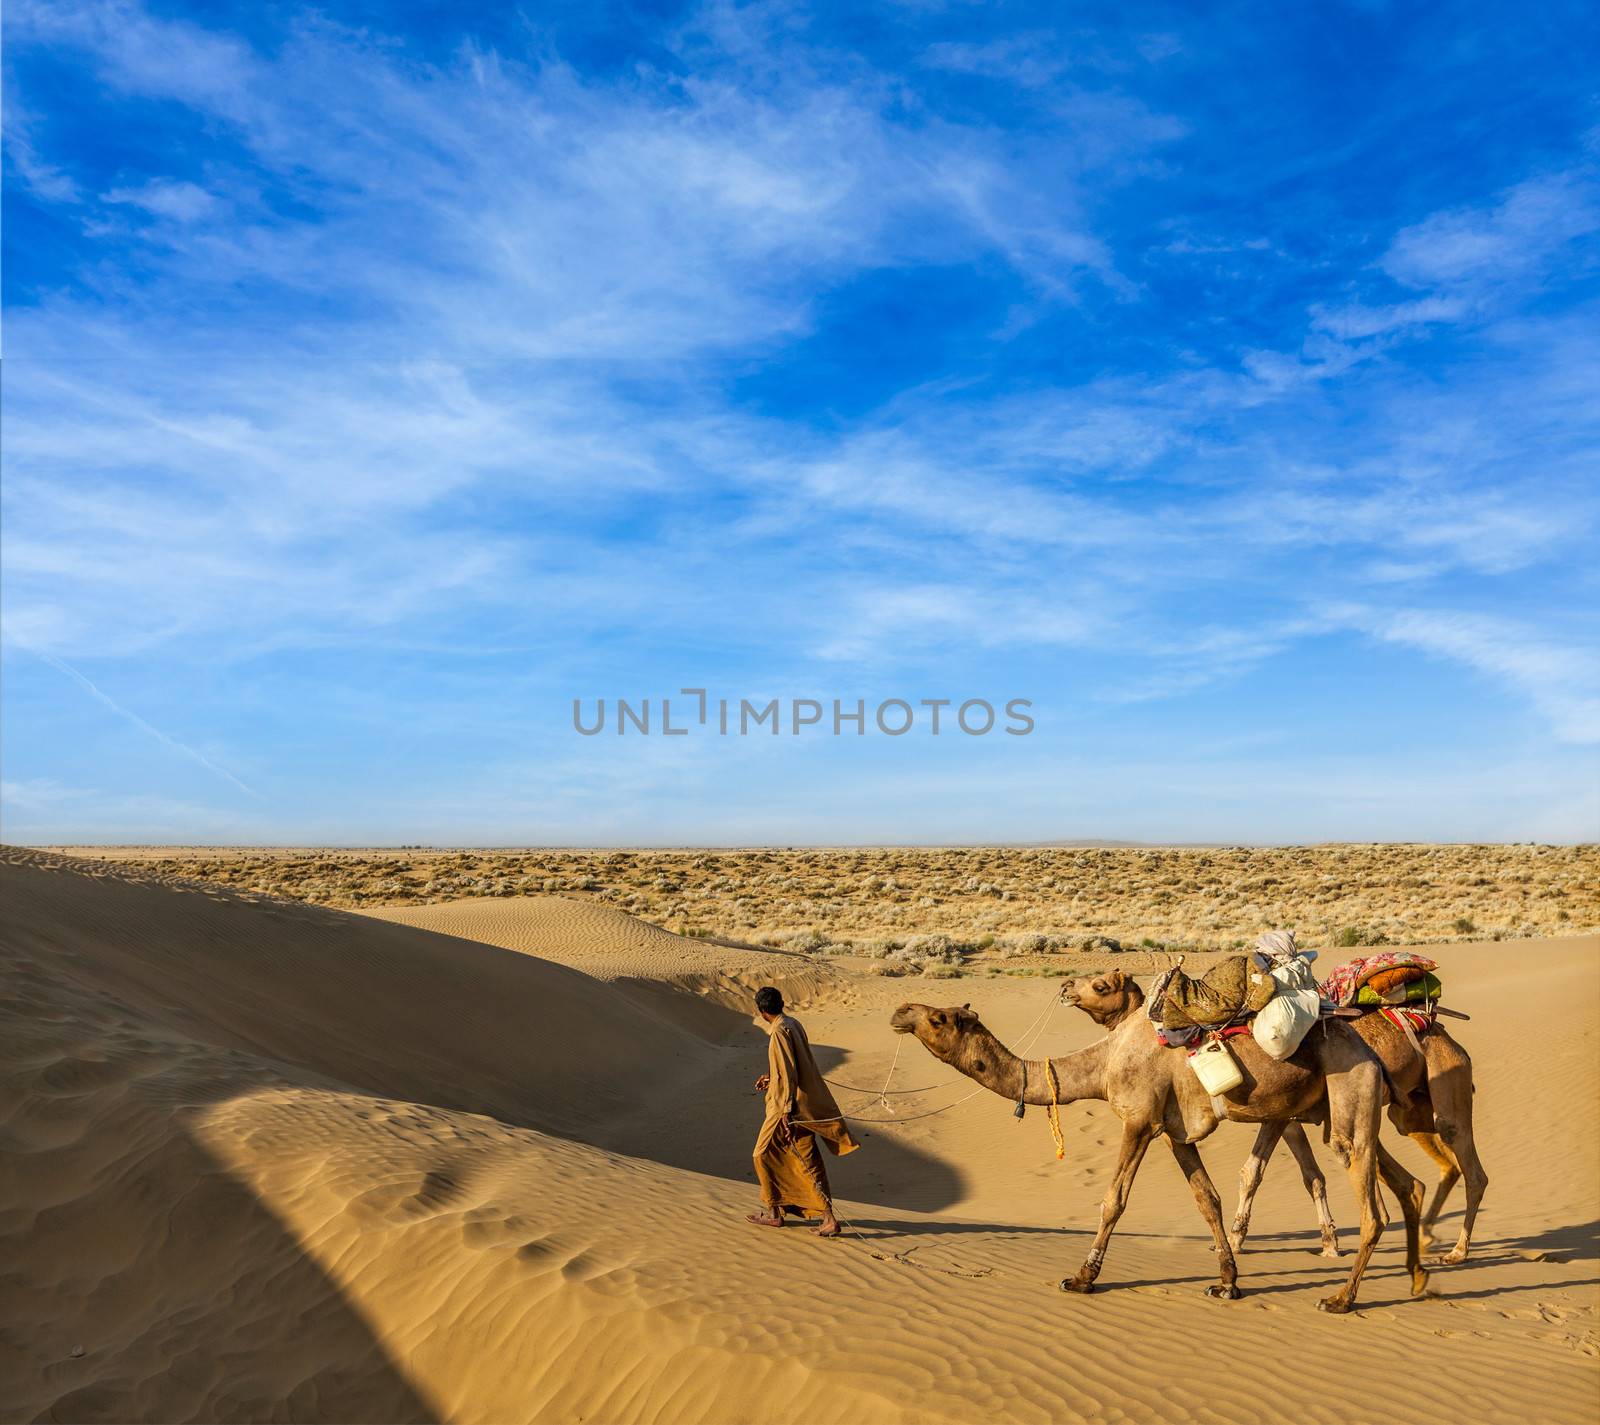 Cameleer (camel driver) with camels in dunes of Thar desert. Raj by dimol